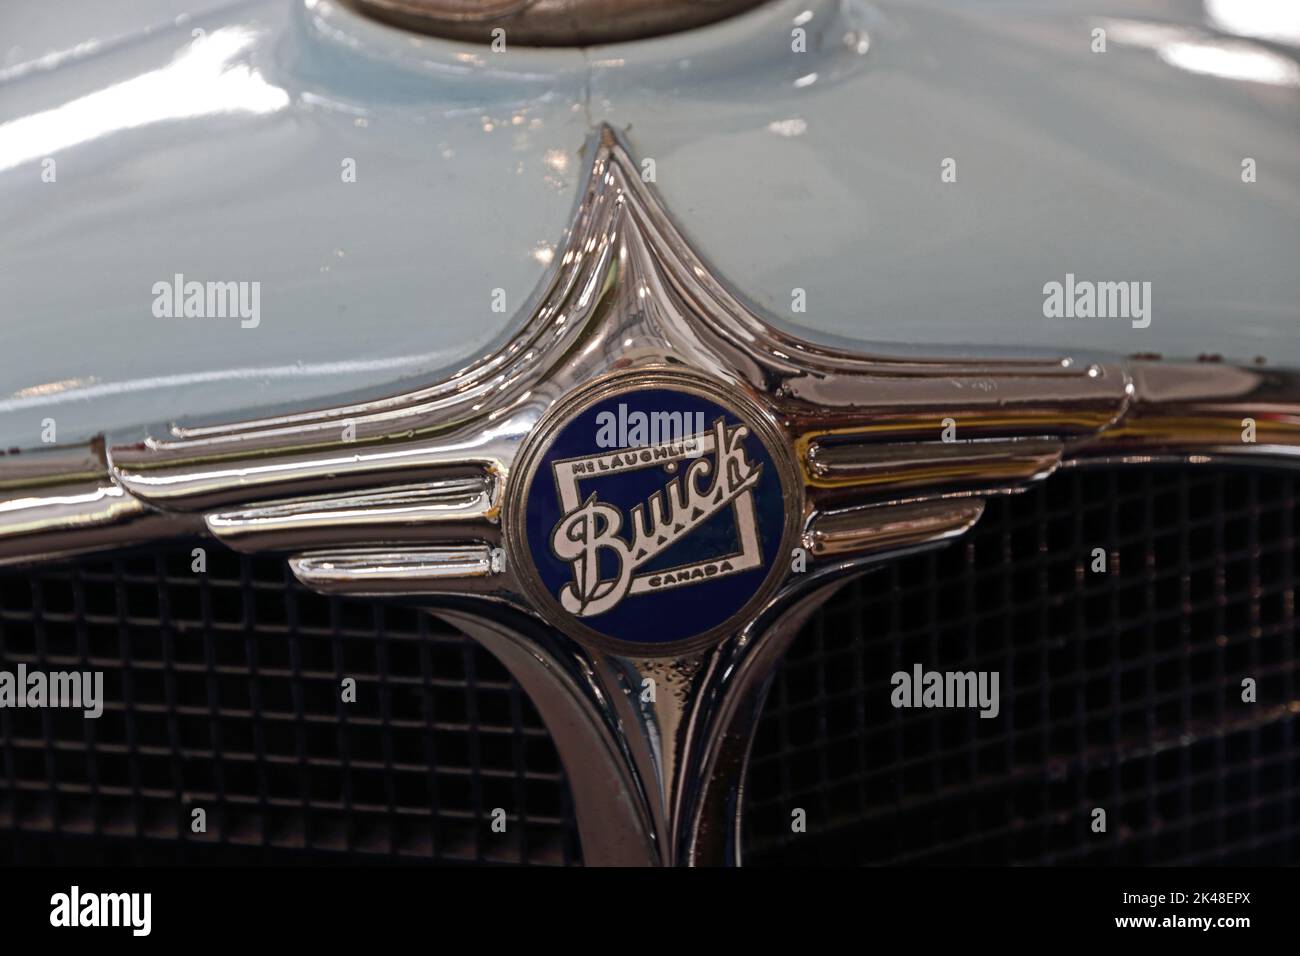 Blue and white, Buick car badge at top of radiator Stock Photo